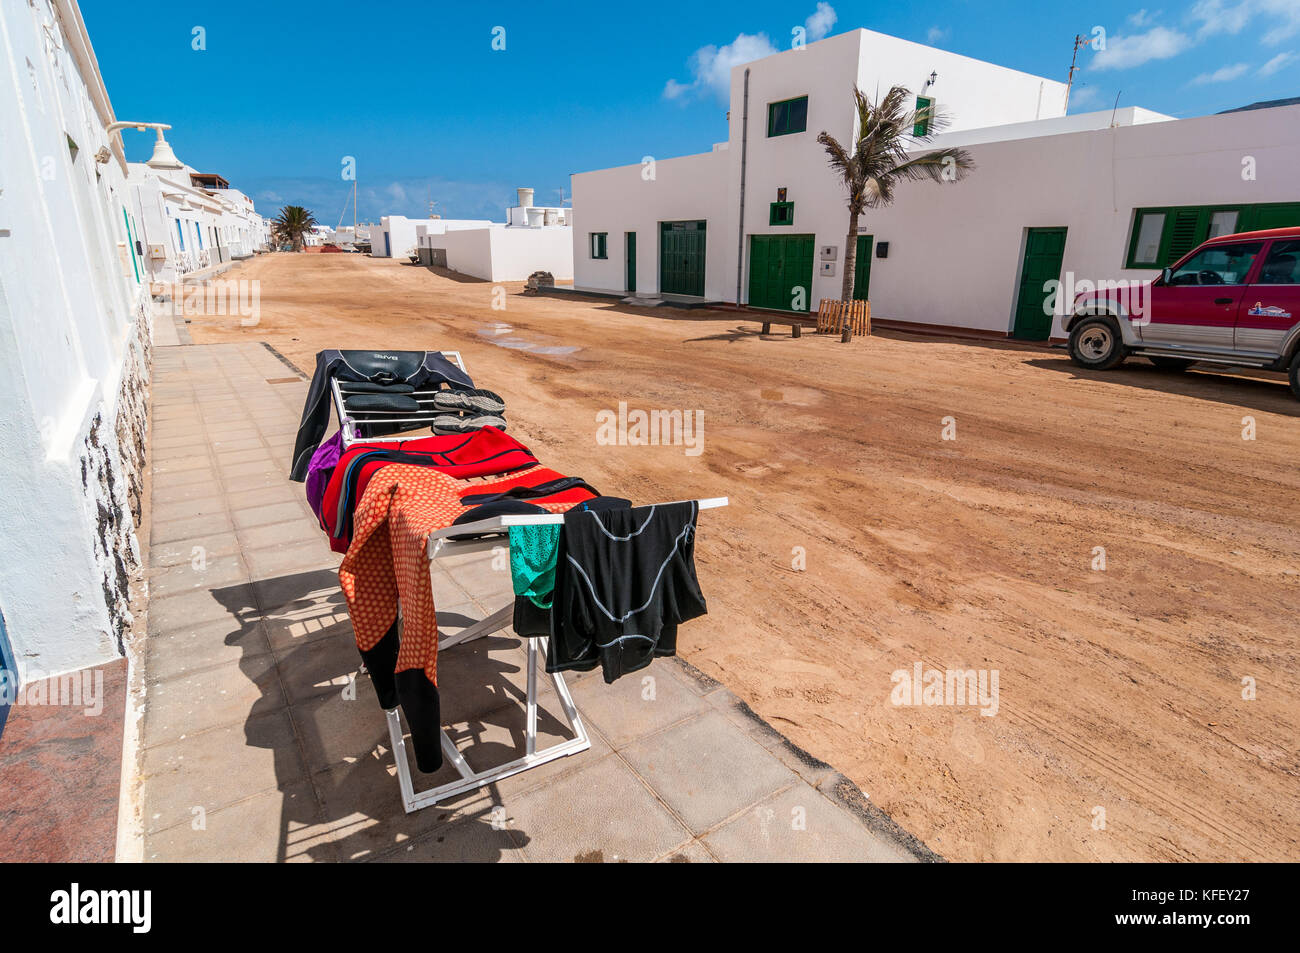 Diving equipment drying in the middle of the street, Caleta del Sebo, La Graciosa, Canary Islands, Spain Stock Photo